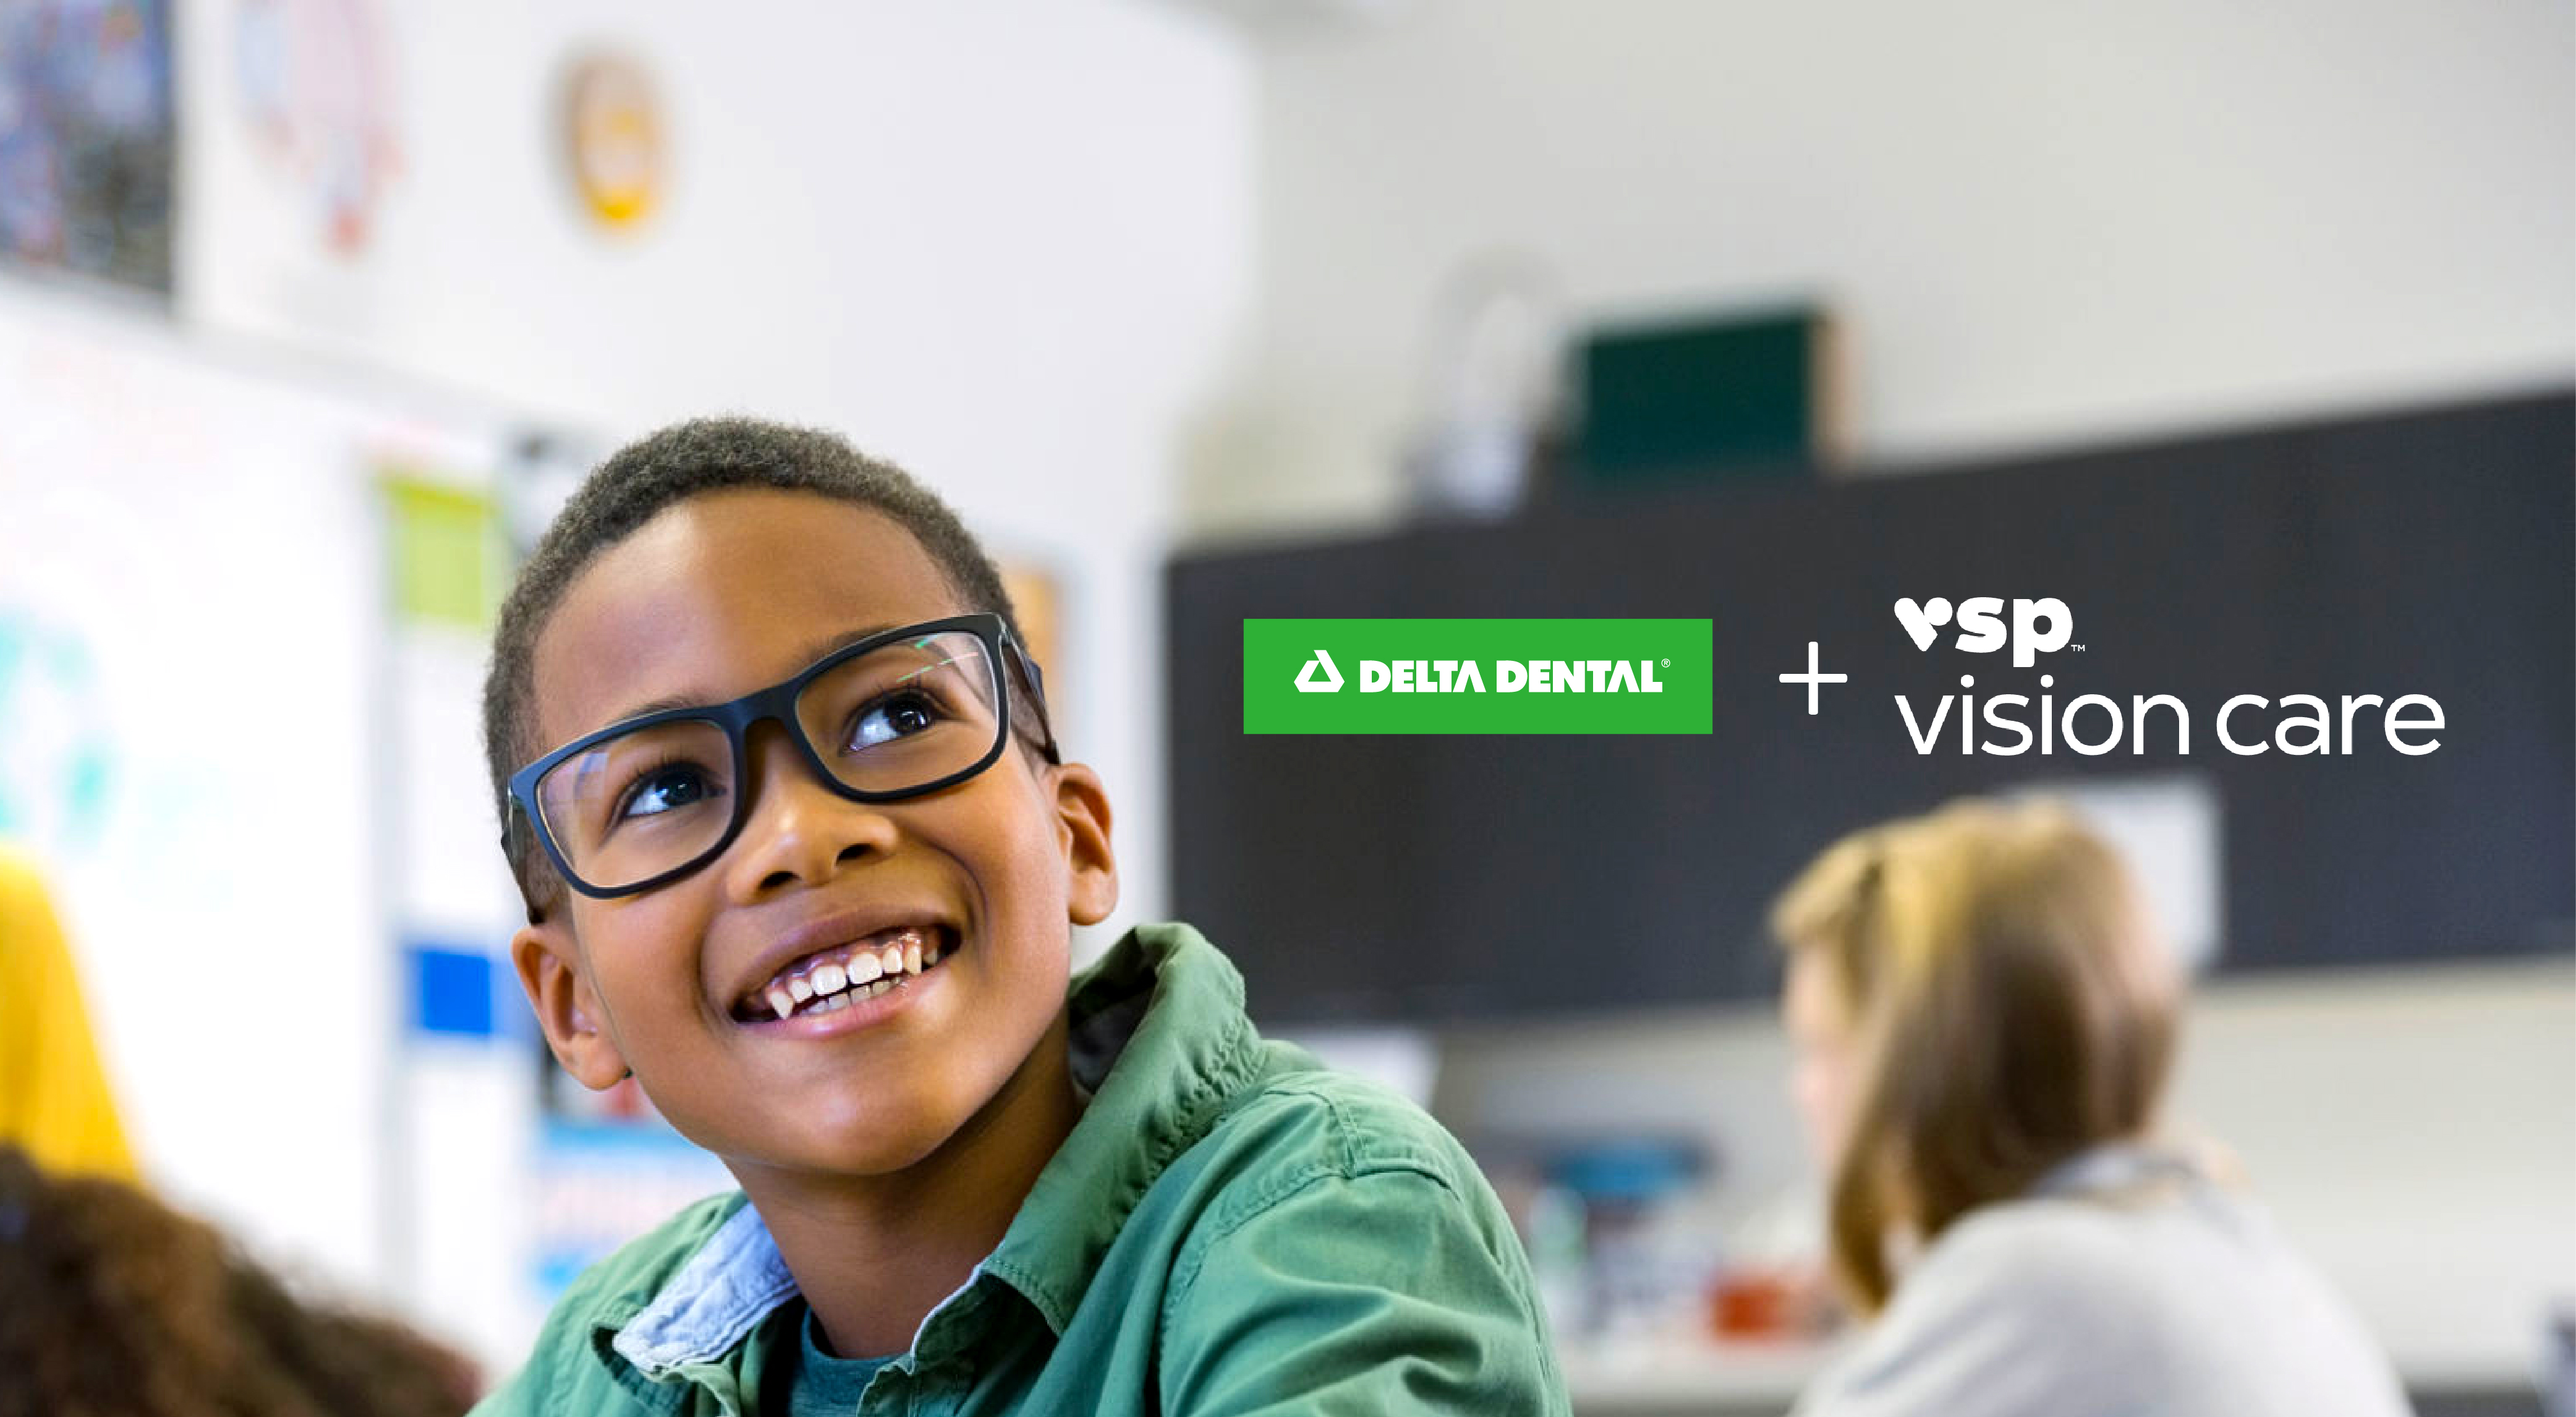 Smiling child with glasses with Delta Dental and VSP